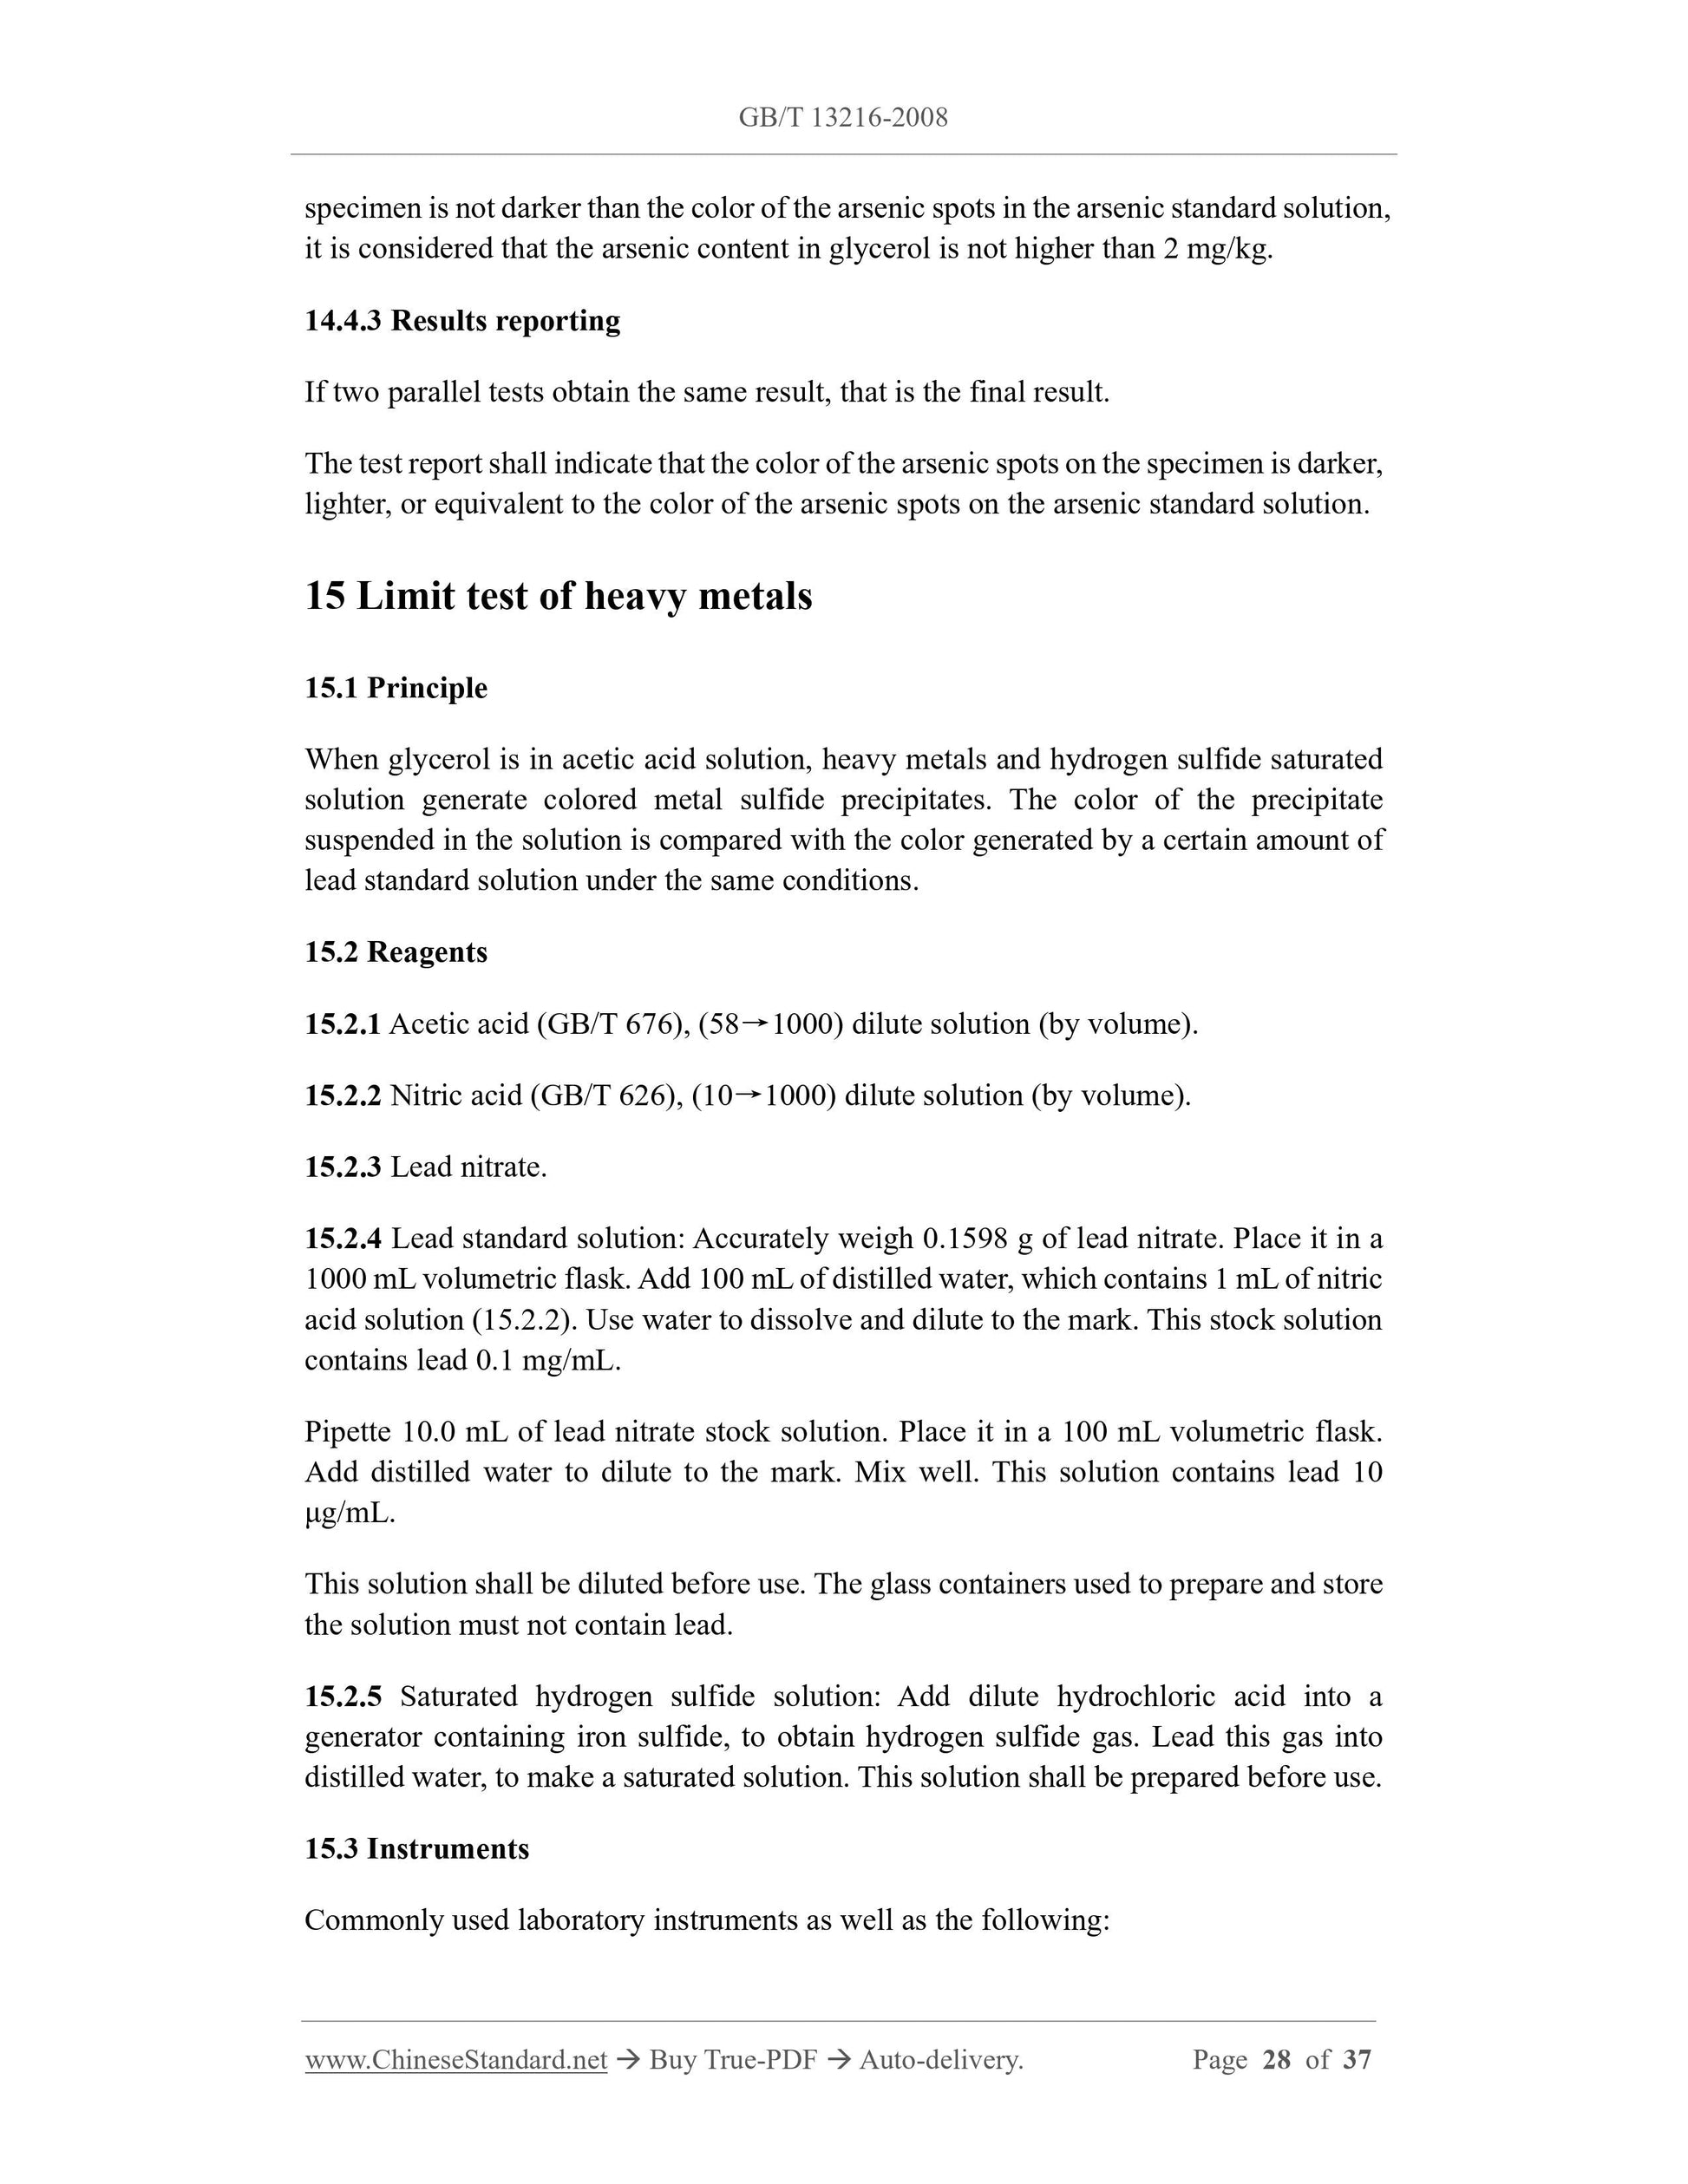 GB/T 13216-2008 Page 12